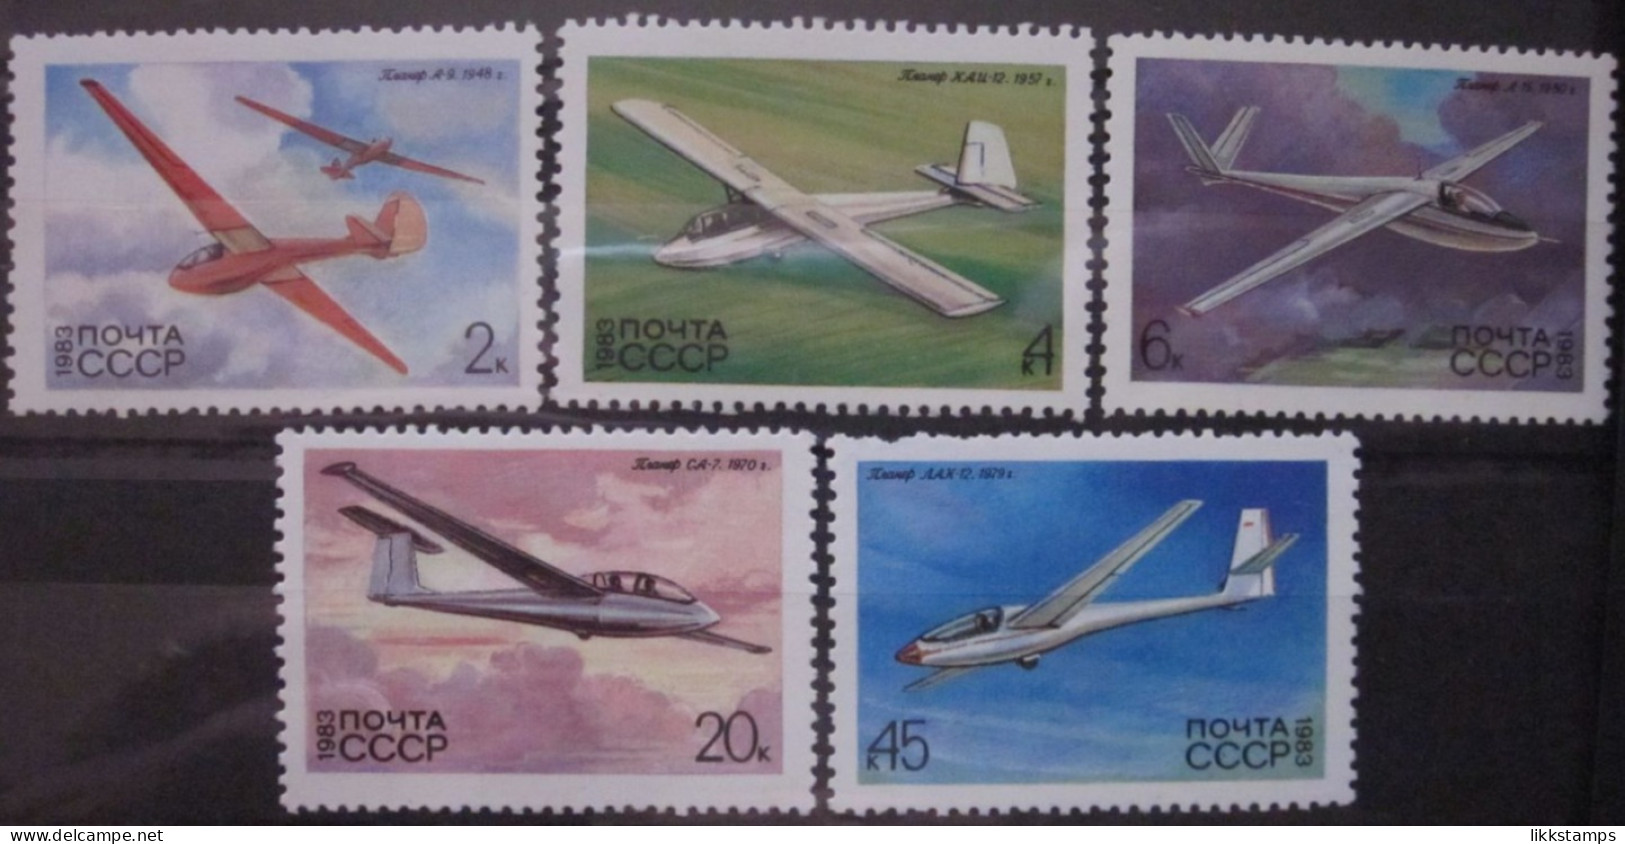 RUSSIA ~ 1983 ~ S.G. NUMBERS 5301 - 5305, ~ GLIDERS. ~ MNH #03633 - Nuevos